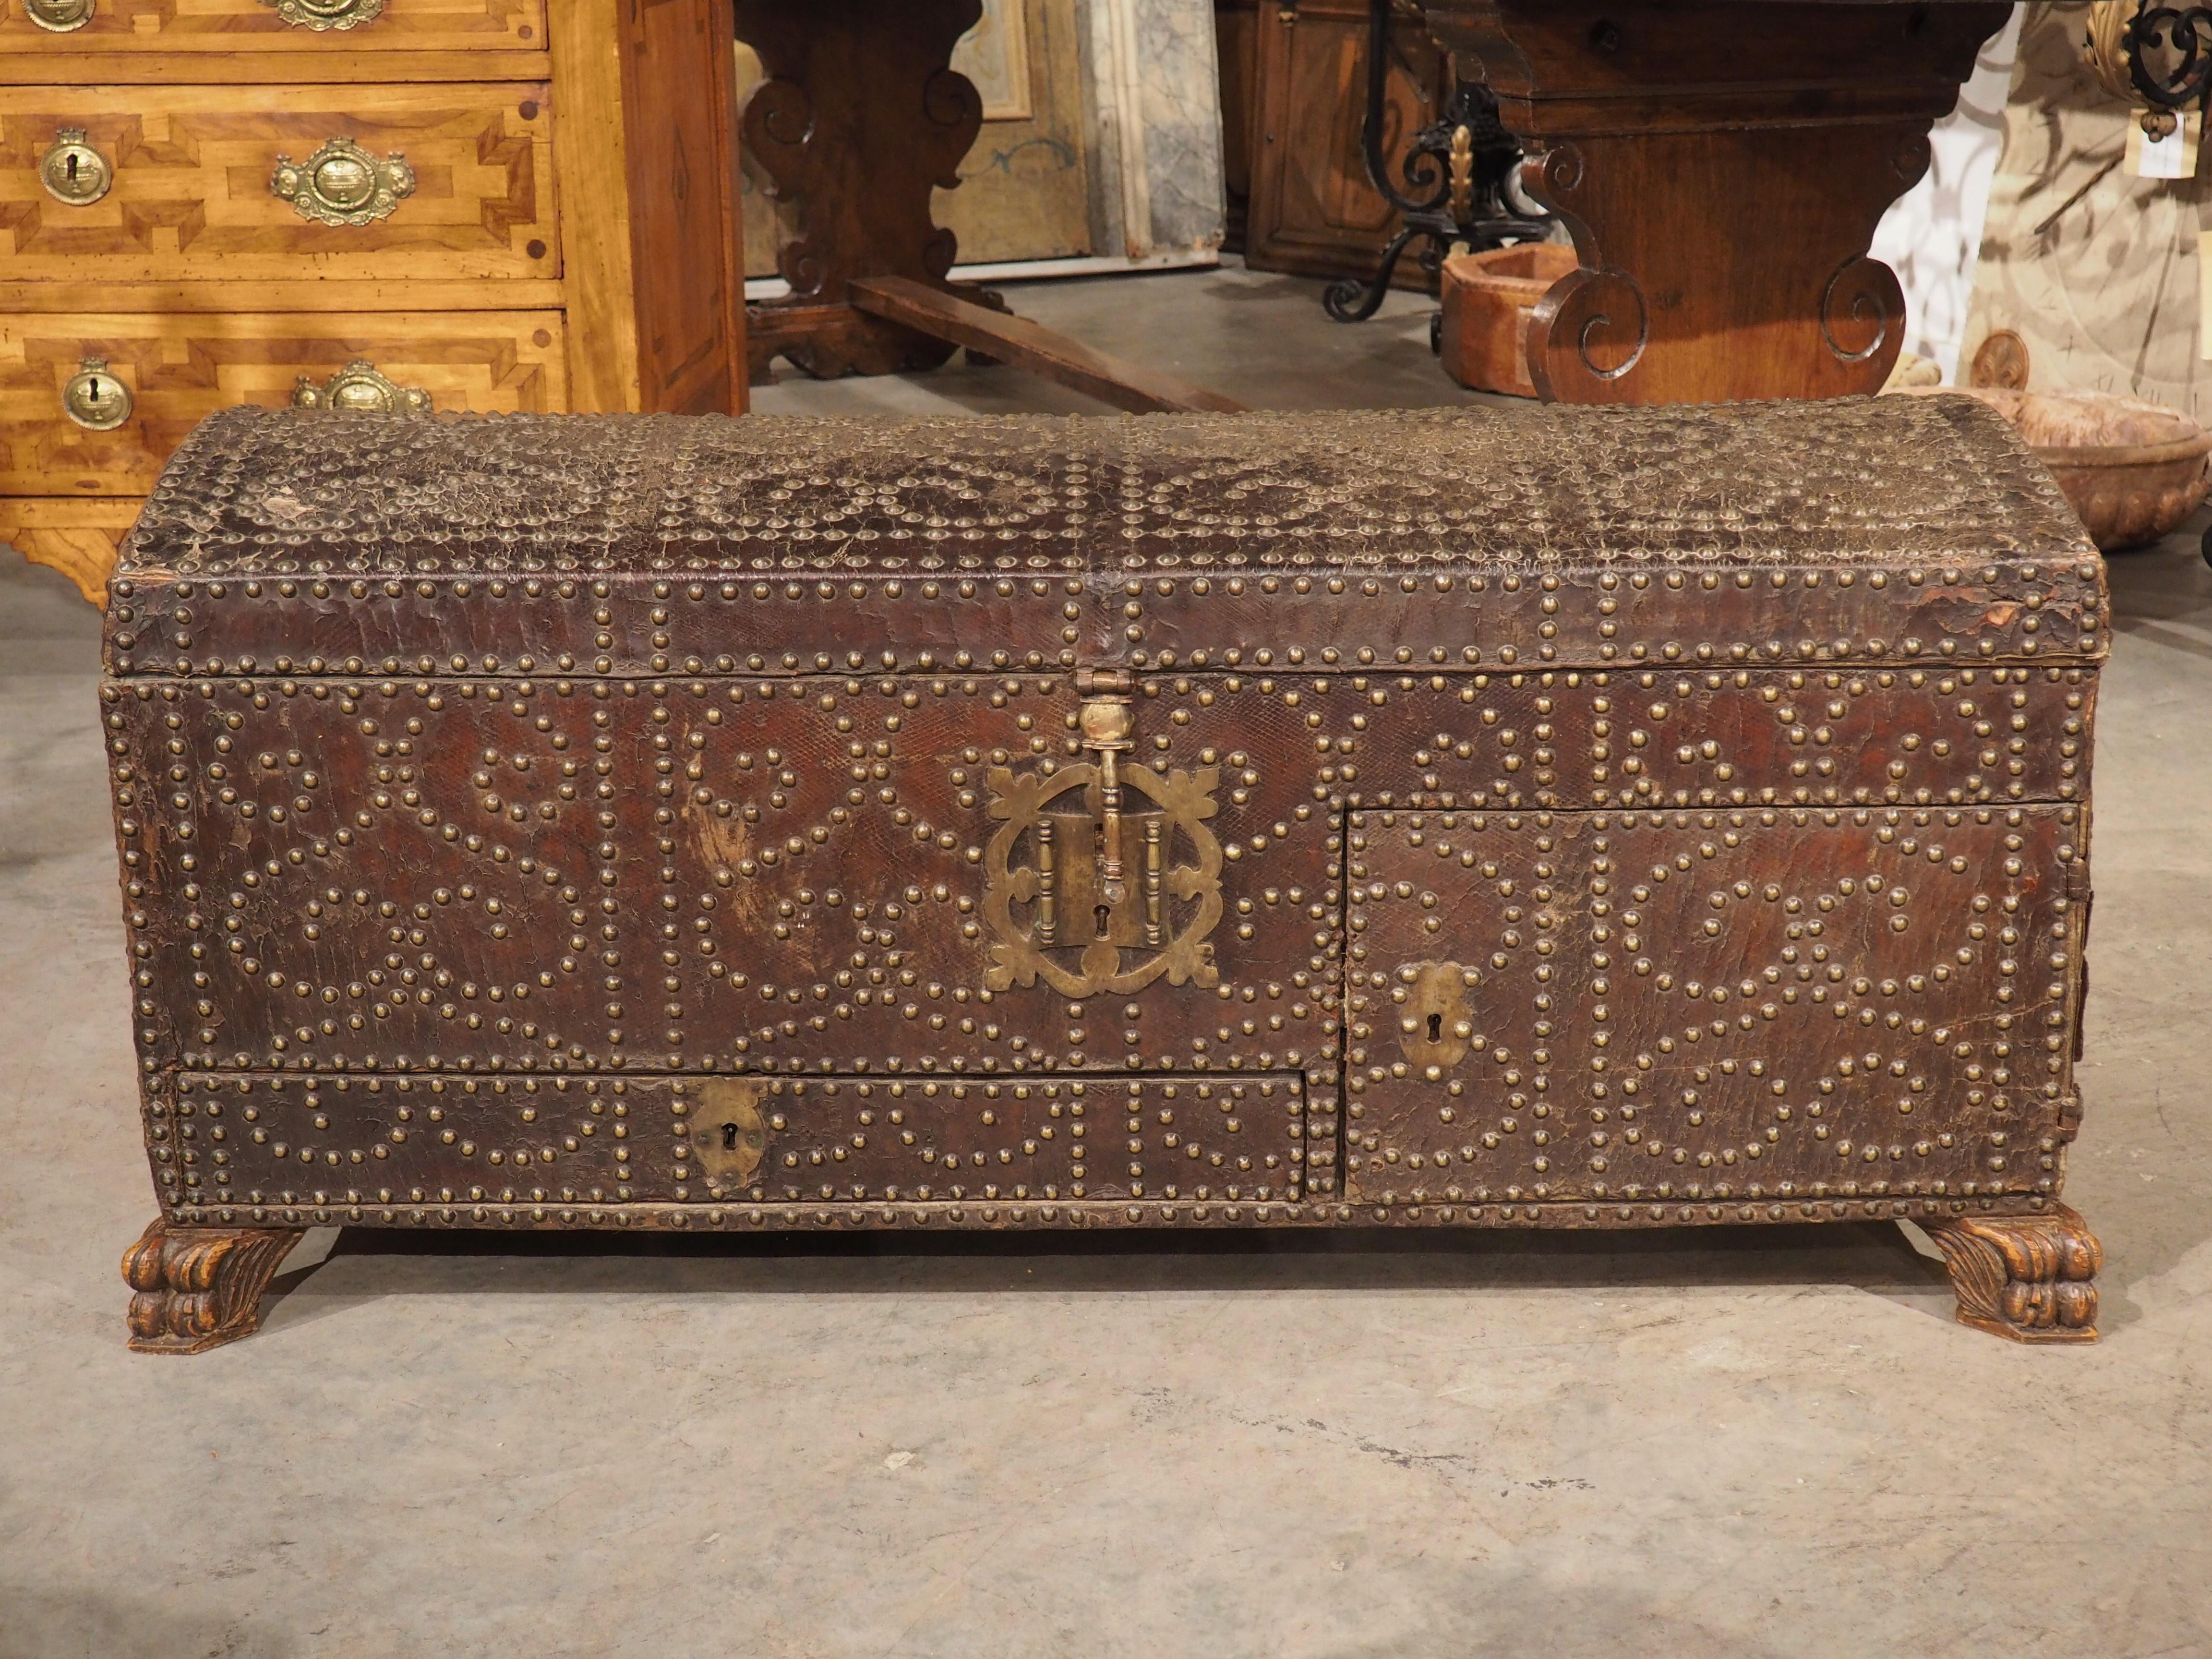 18th Century Spanish Studded Leather Trunk with Lockable Compartments In Good Condition For Sale In Dallas, TX